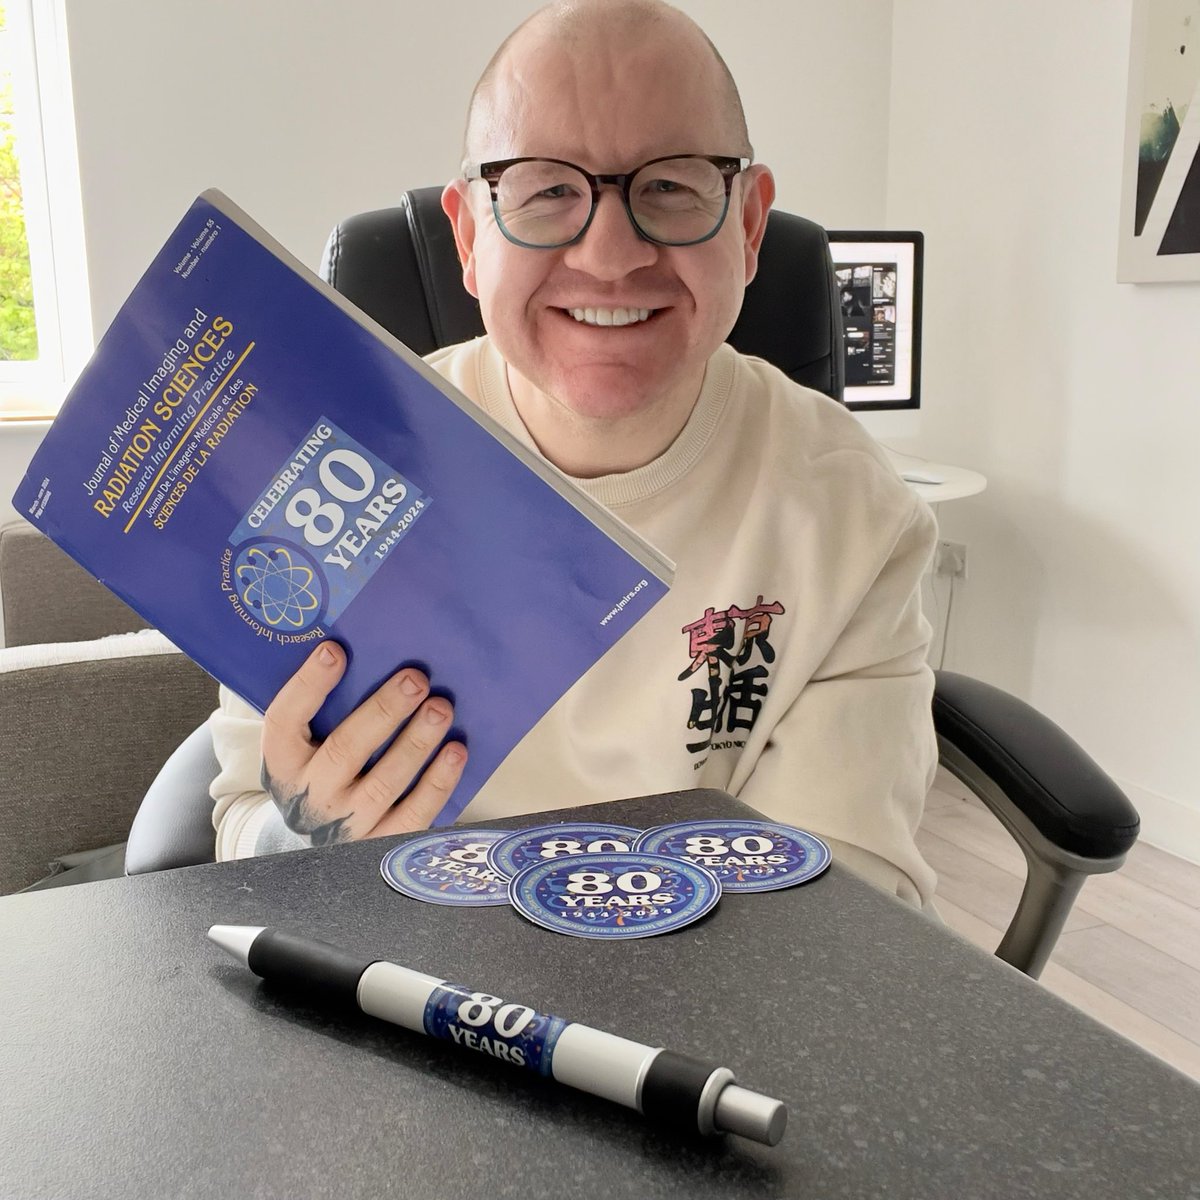 I got a package from Canada 🇨🇦. The latest issue of @JMIRS1 and promo materials, featuring the logo we designed to celebrate the 80th anniversary. Thanks team 💙